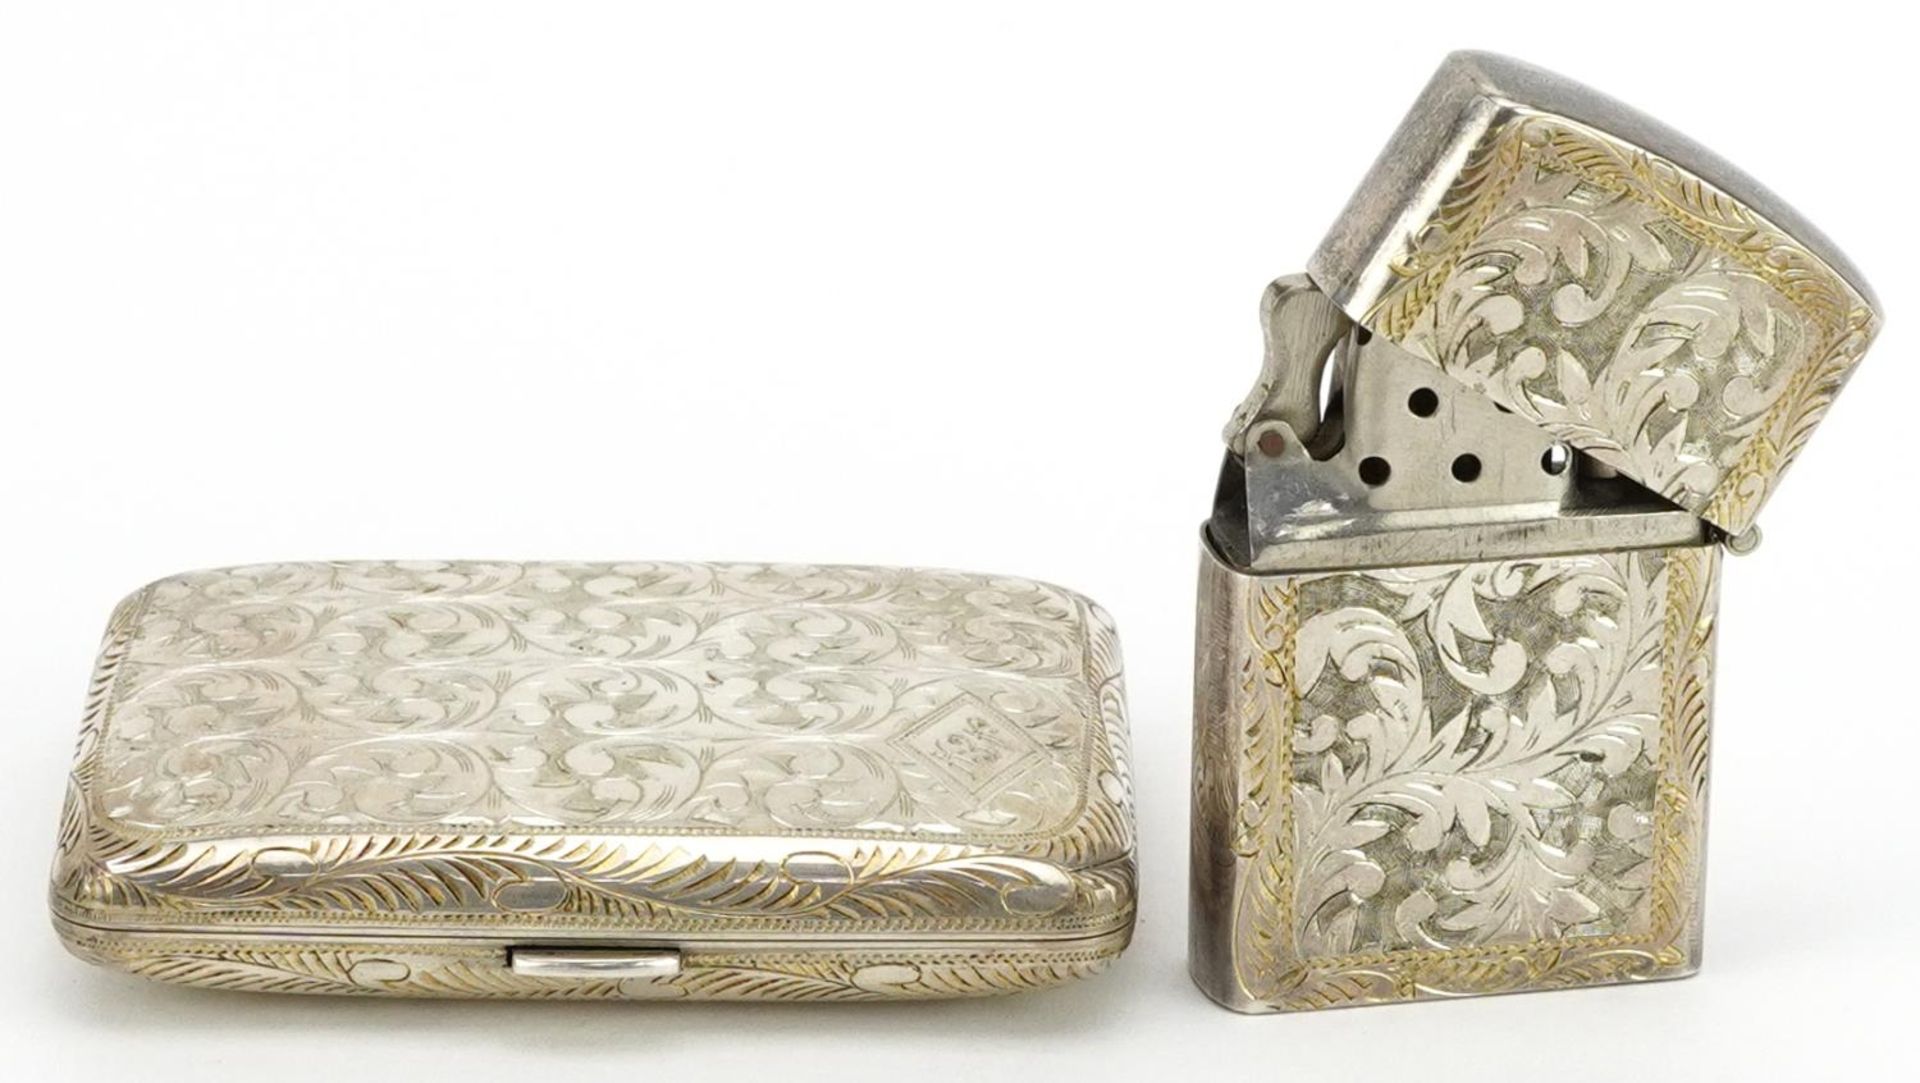 Japanese 950 grade engraved silver cased Zippo design lighter and cigarette case housed in a - Image 2 of 7